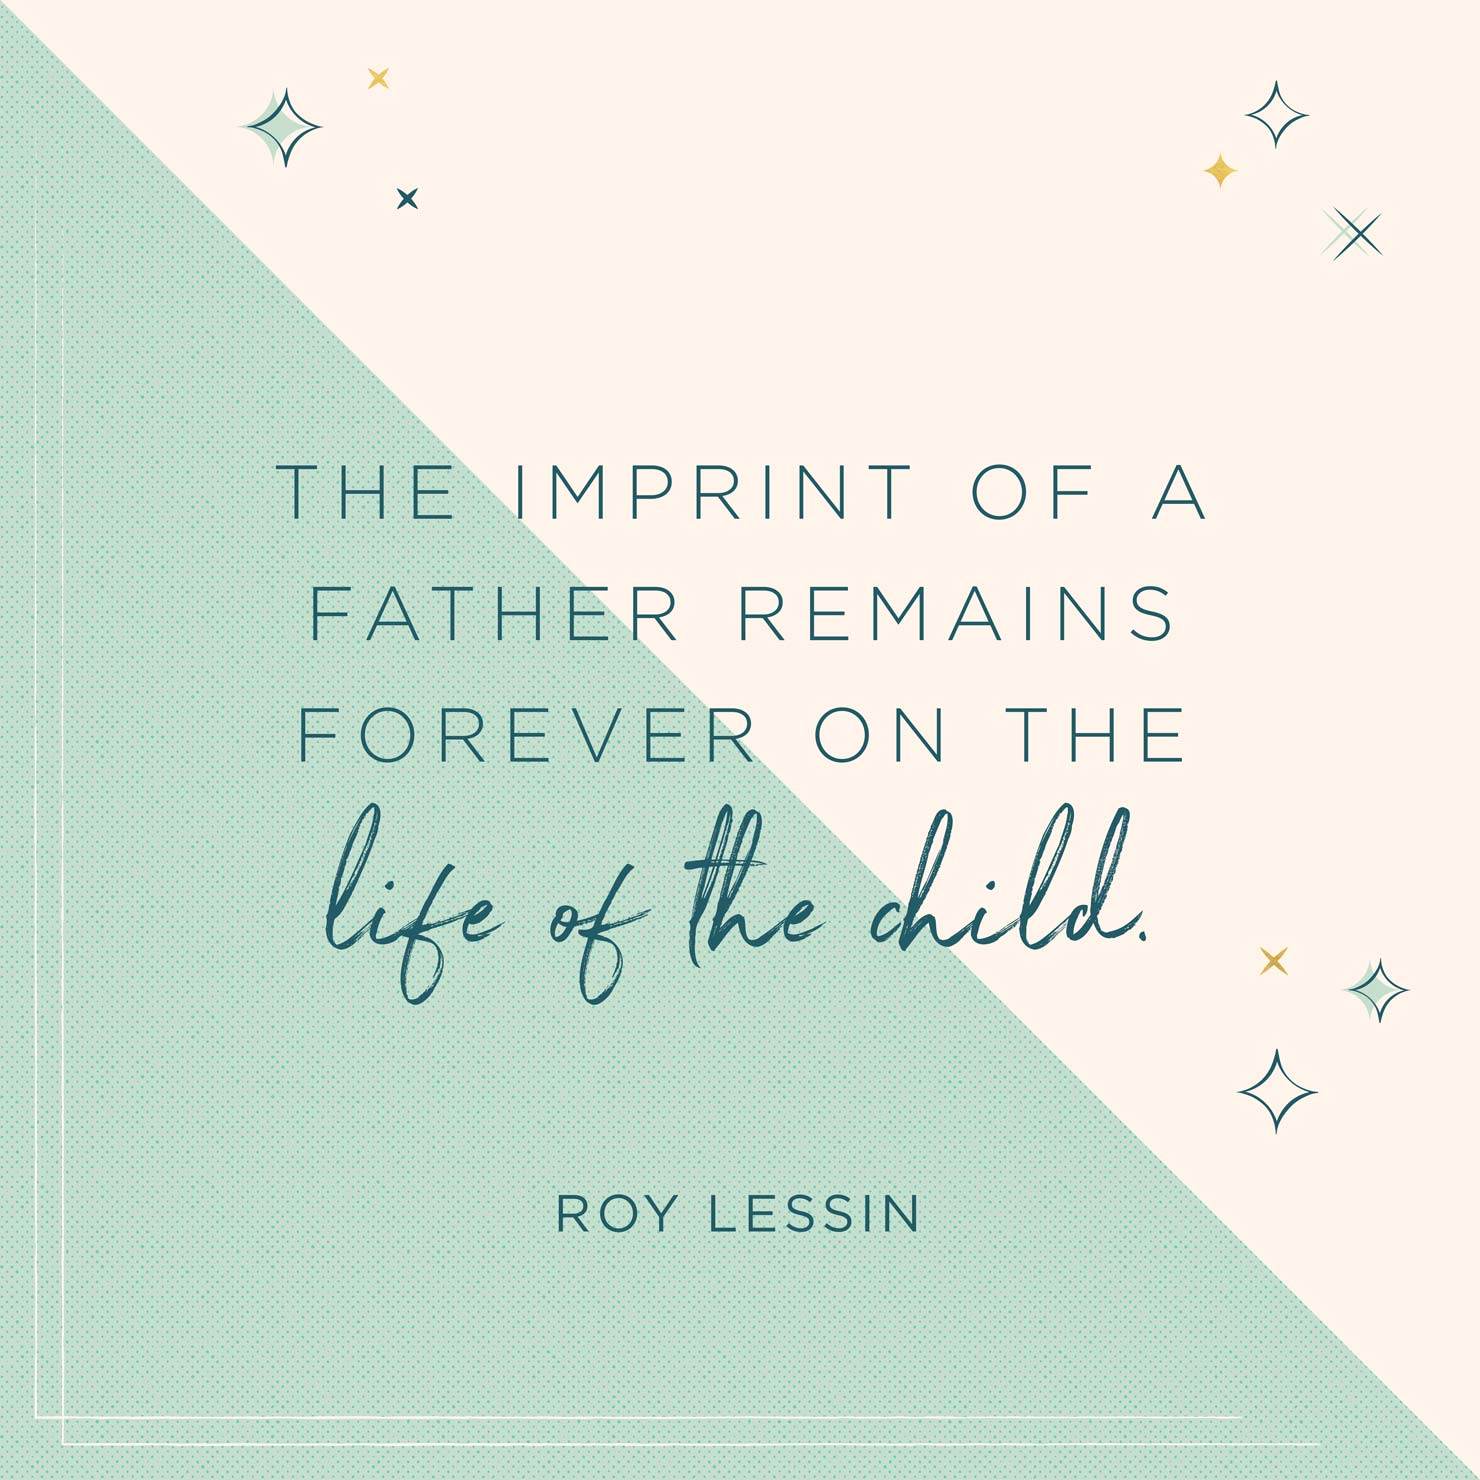 the imprint of a father remains forever on the life of the child. roy lessin